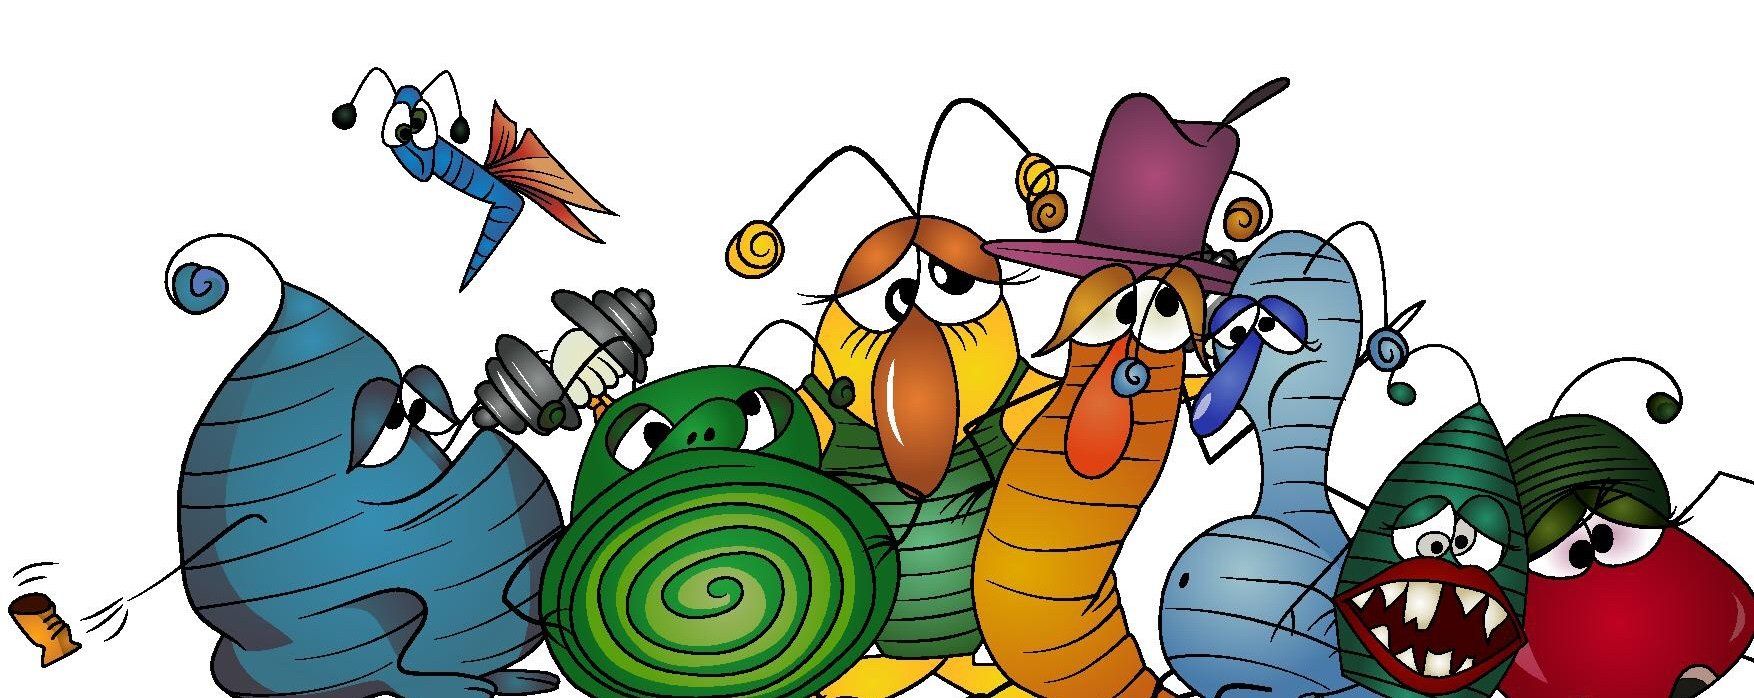 Image of seven of the Life's Little Bugs characters